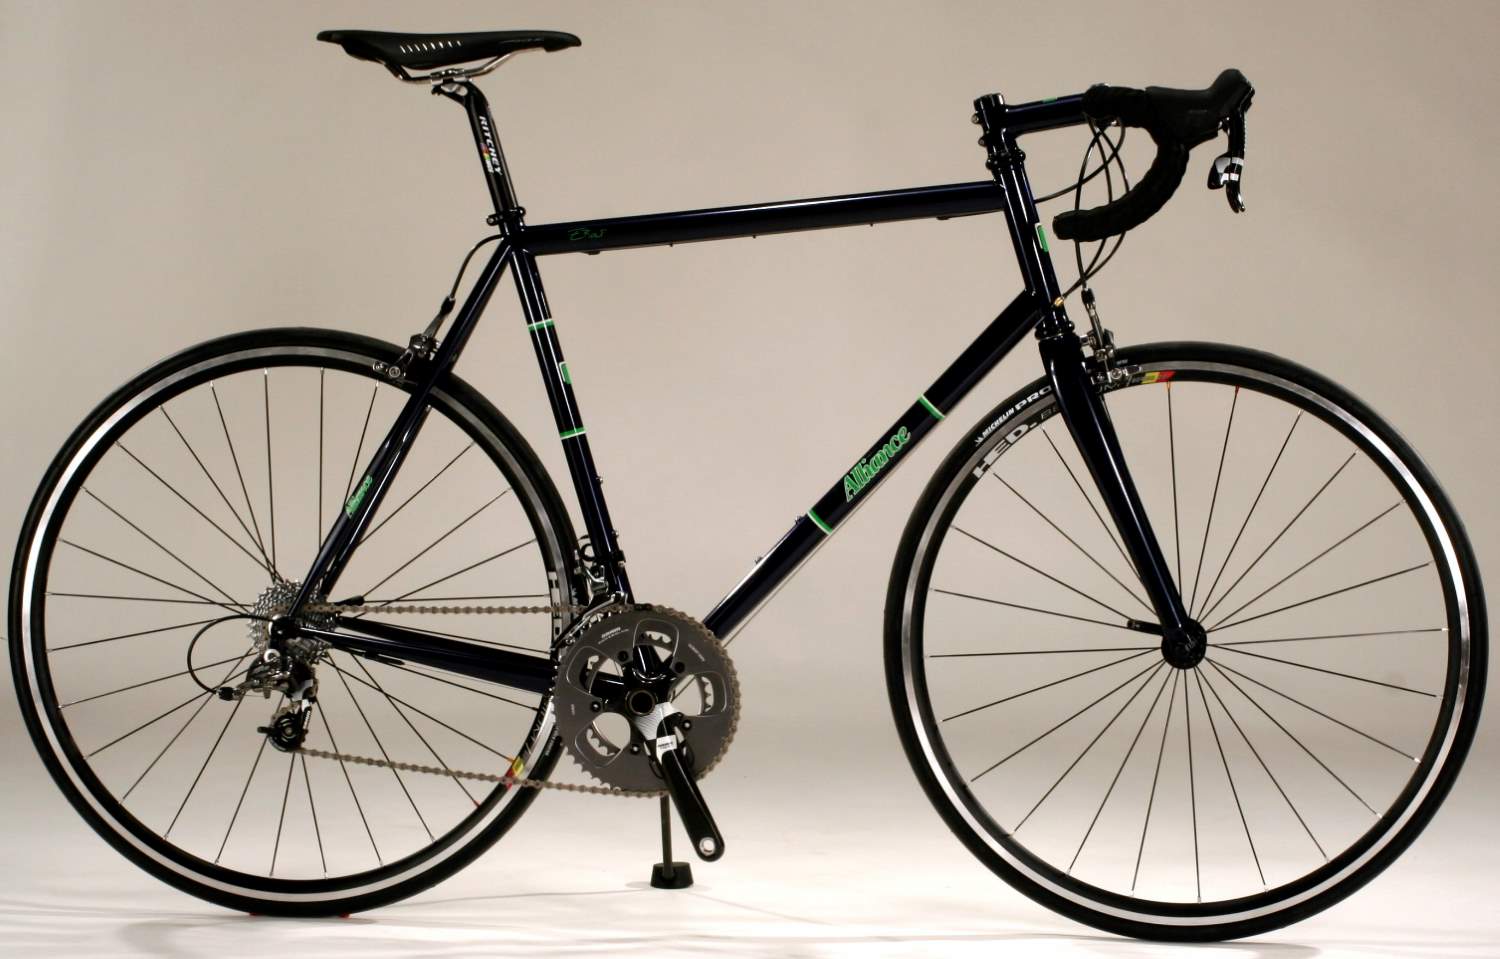 Boutique Bicycle Manufacturers - Alliance road bike